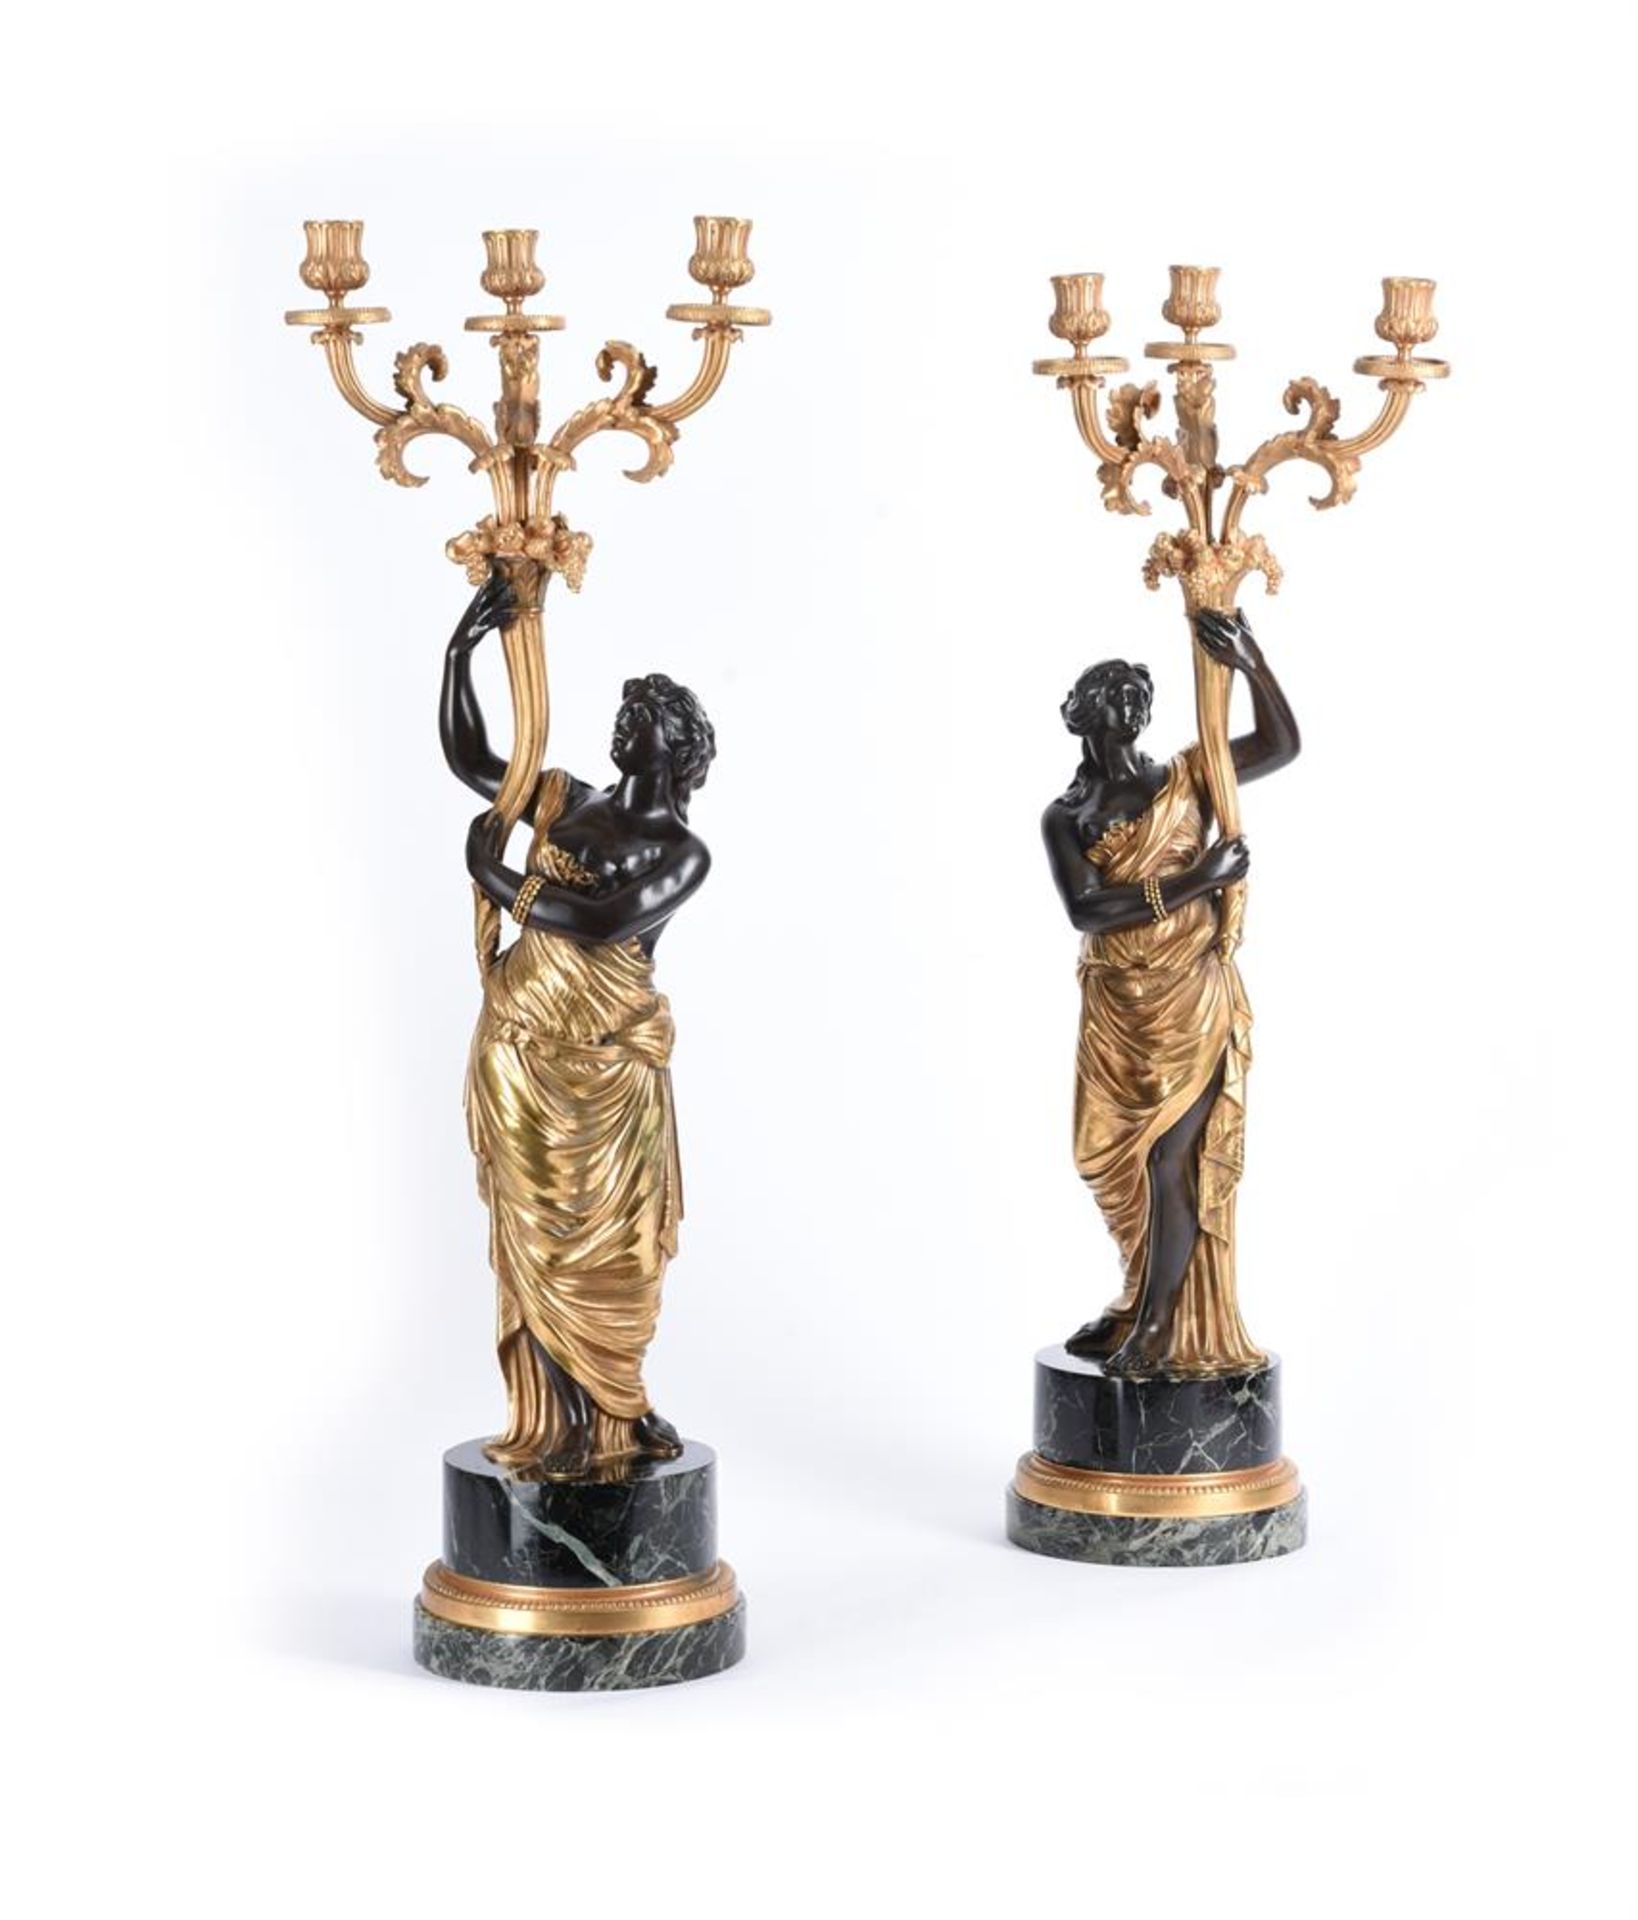 A PAIR OF ORMOLU AND PATINATED BRONZE THREE LIGHT CANDELABRA, LATE 19TH/EARLY 20TH CENTURY - Image 2 of 6